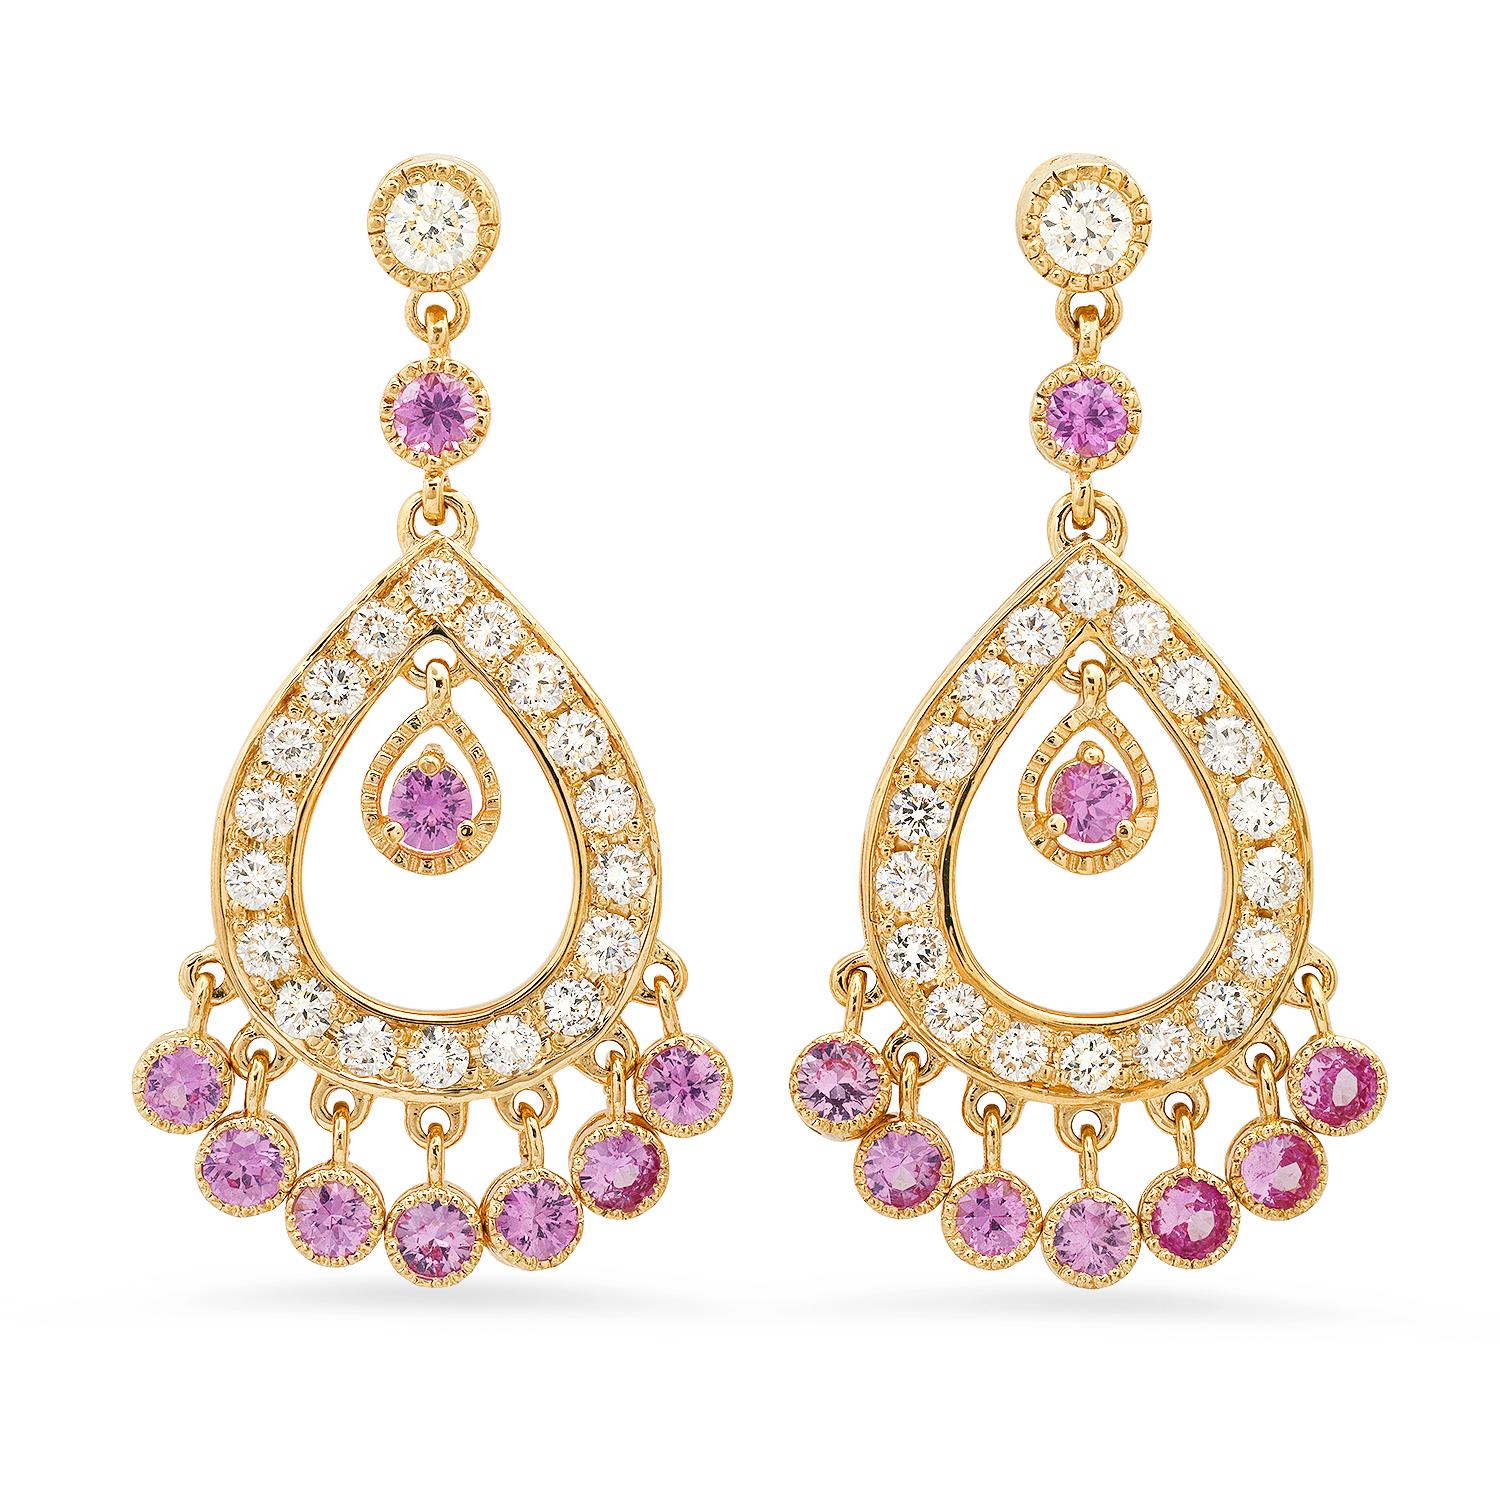 14K Yellow Gold 2.50ct Pink Sapphire and 2.05ct Diamond Earrings